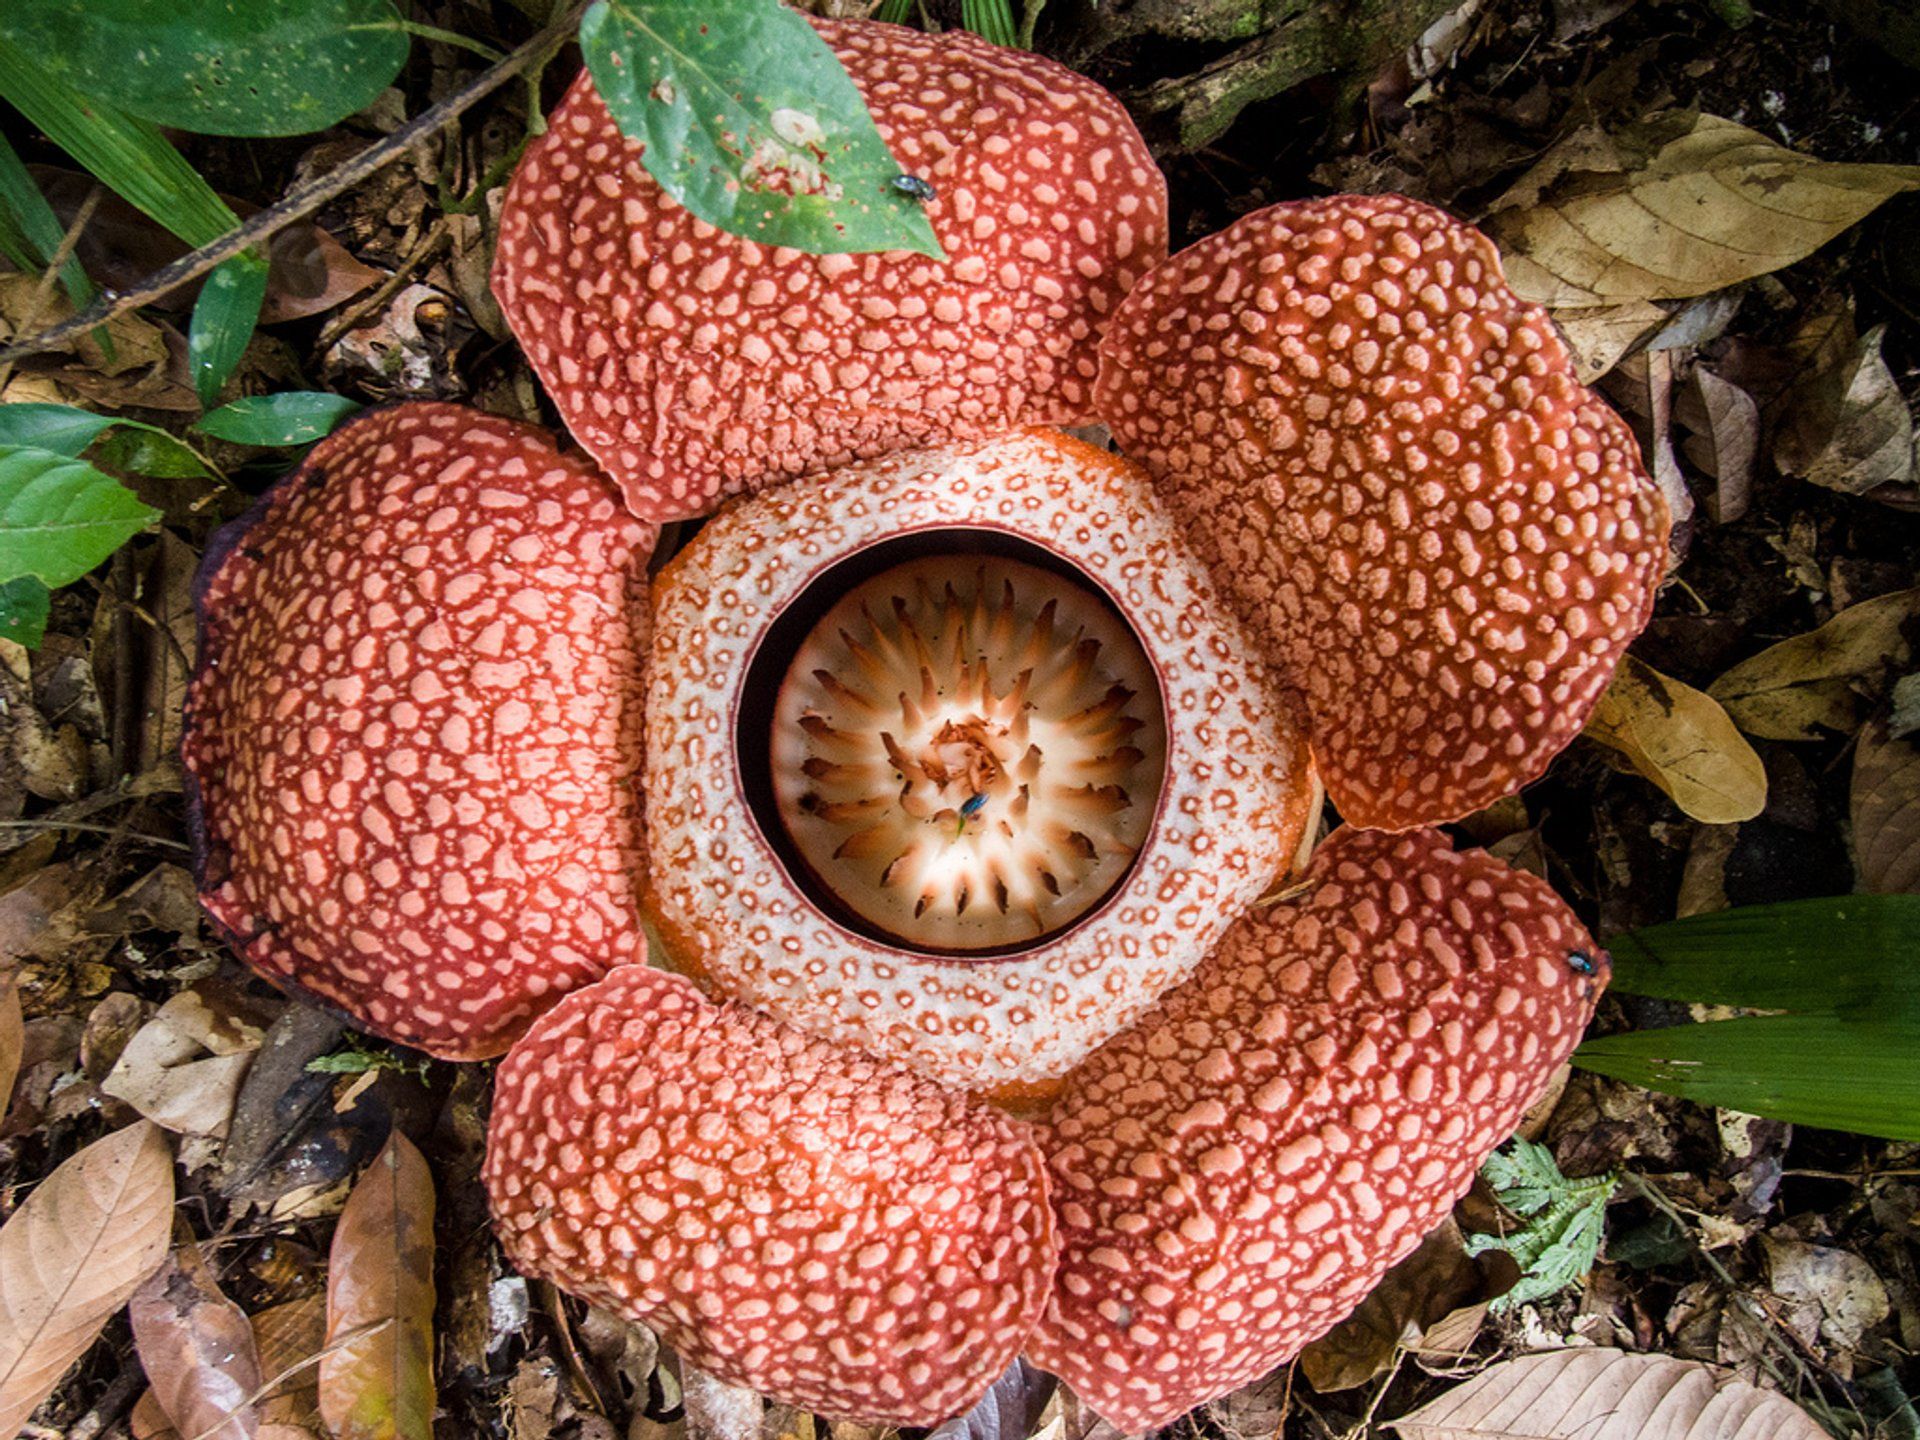 Best Time to See Rafflesia in Malaysia 2021 to See